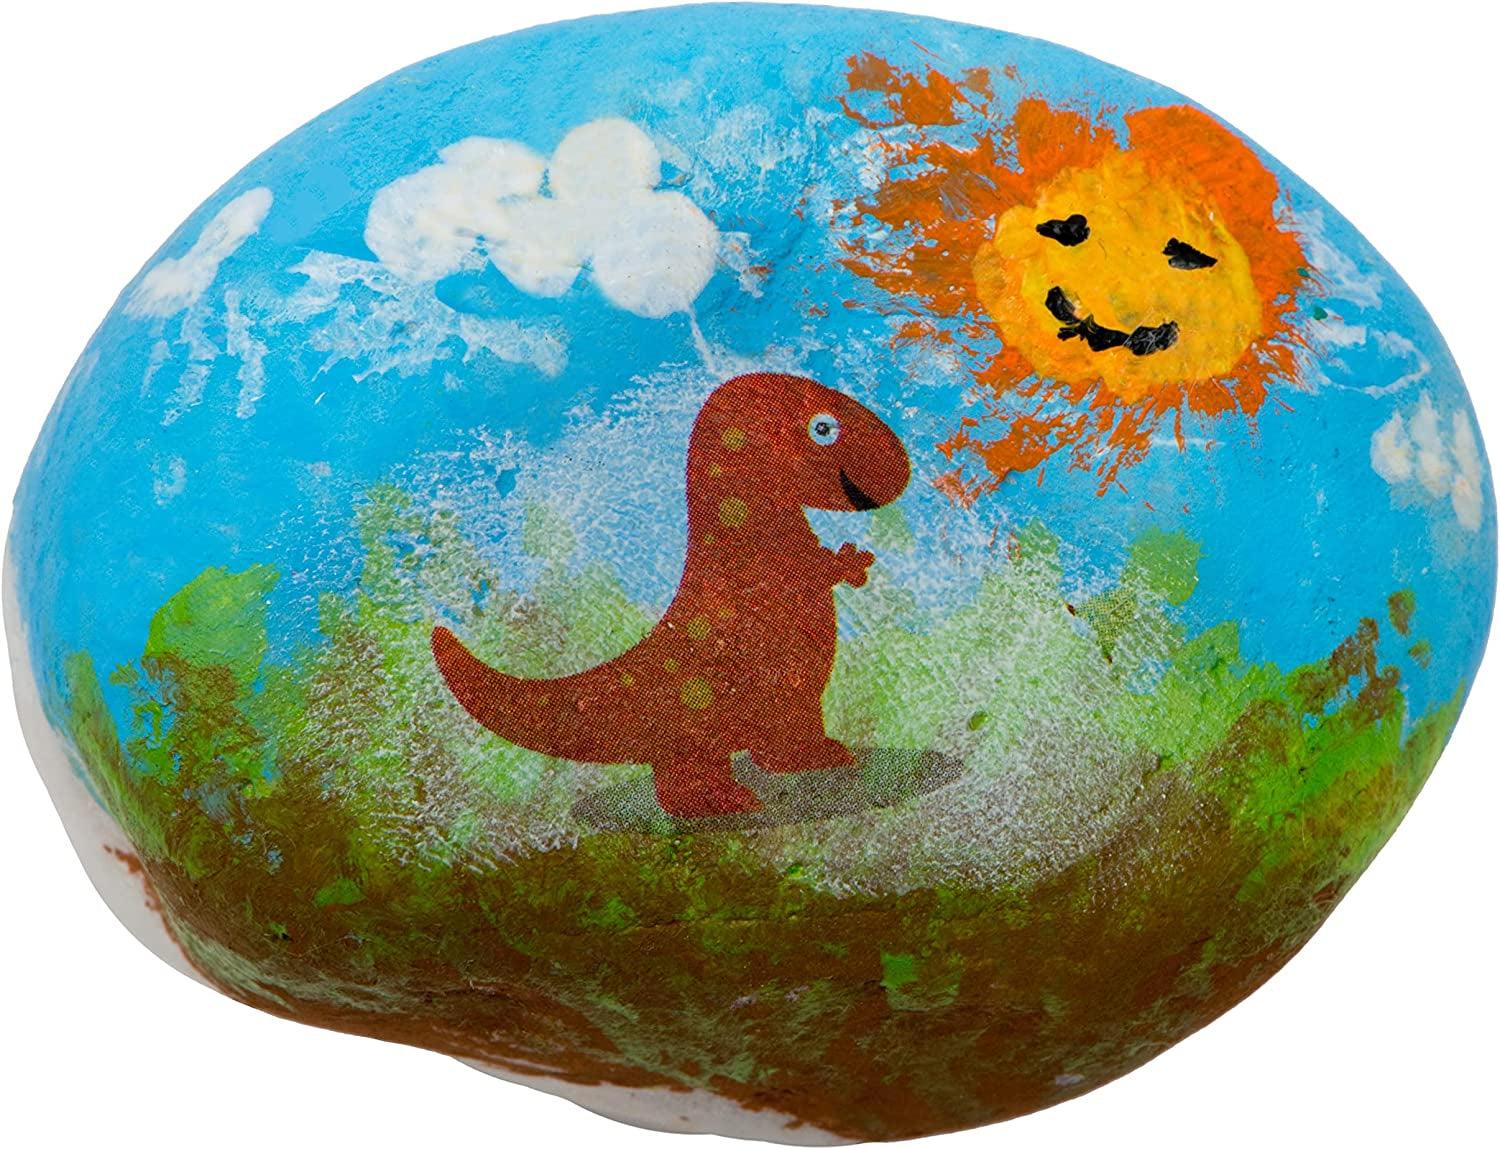 Rock Painting Kit for Kids - Arts & Crafts Supplies Set for Girls & Boys Ages 6-12 - WoodArtSupply